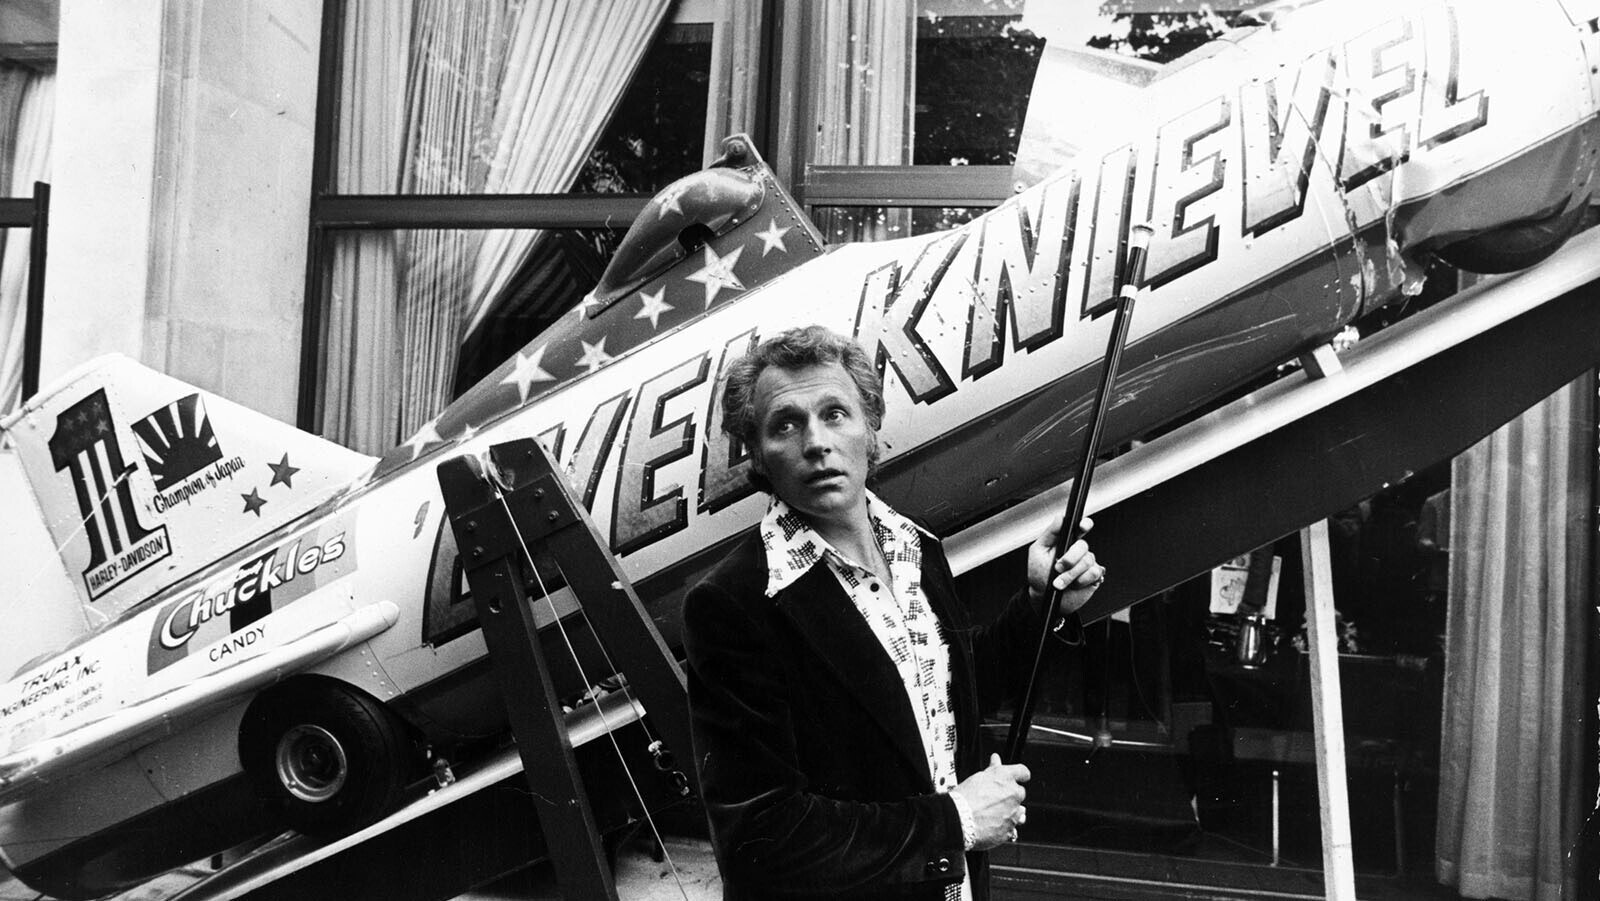 Evel Knievel with the Sky-Cycle X-2 rocket after he failed to clear the Snake River Canyon in it. He used the beat-up rocket to promote his next stunt — jumping 13 buses at Wembley Stadium in England.